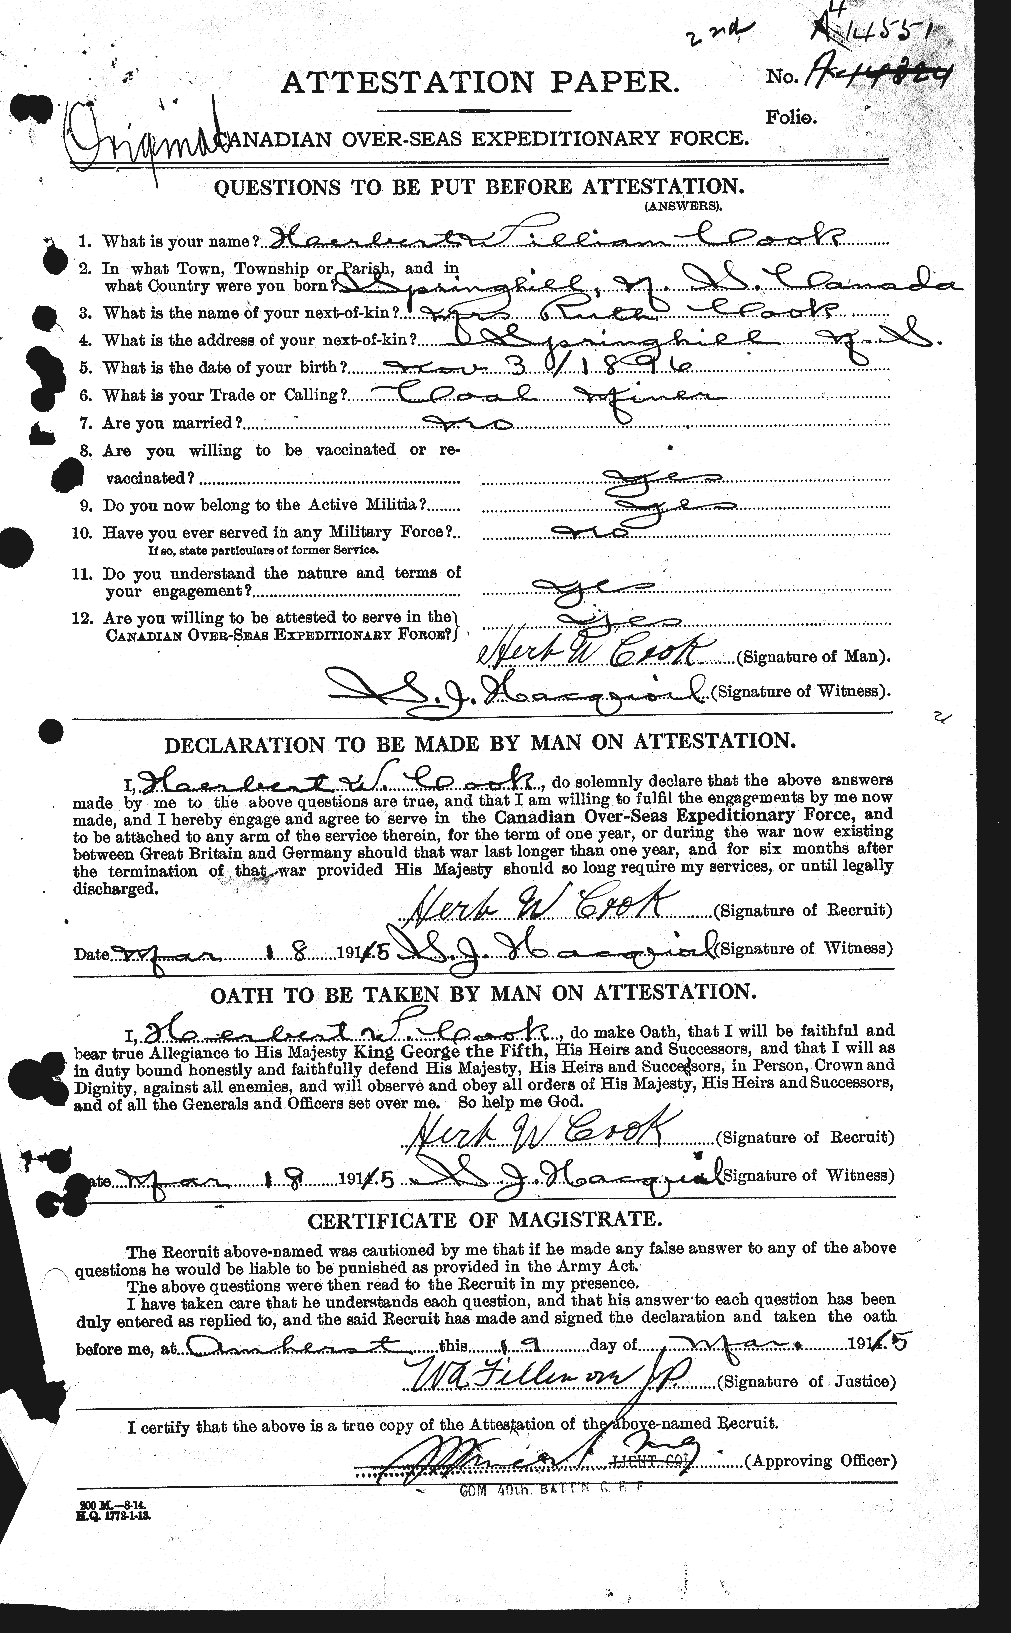 Personnel Records of the First World War - CEF 073713a